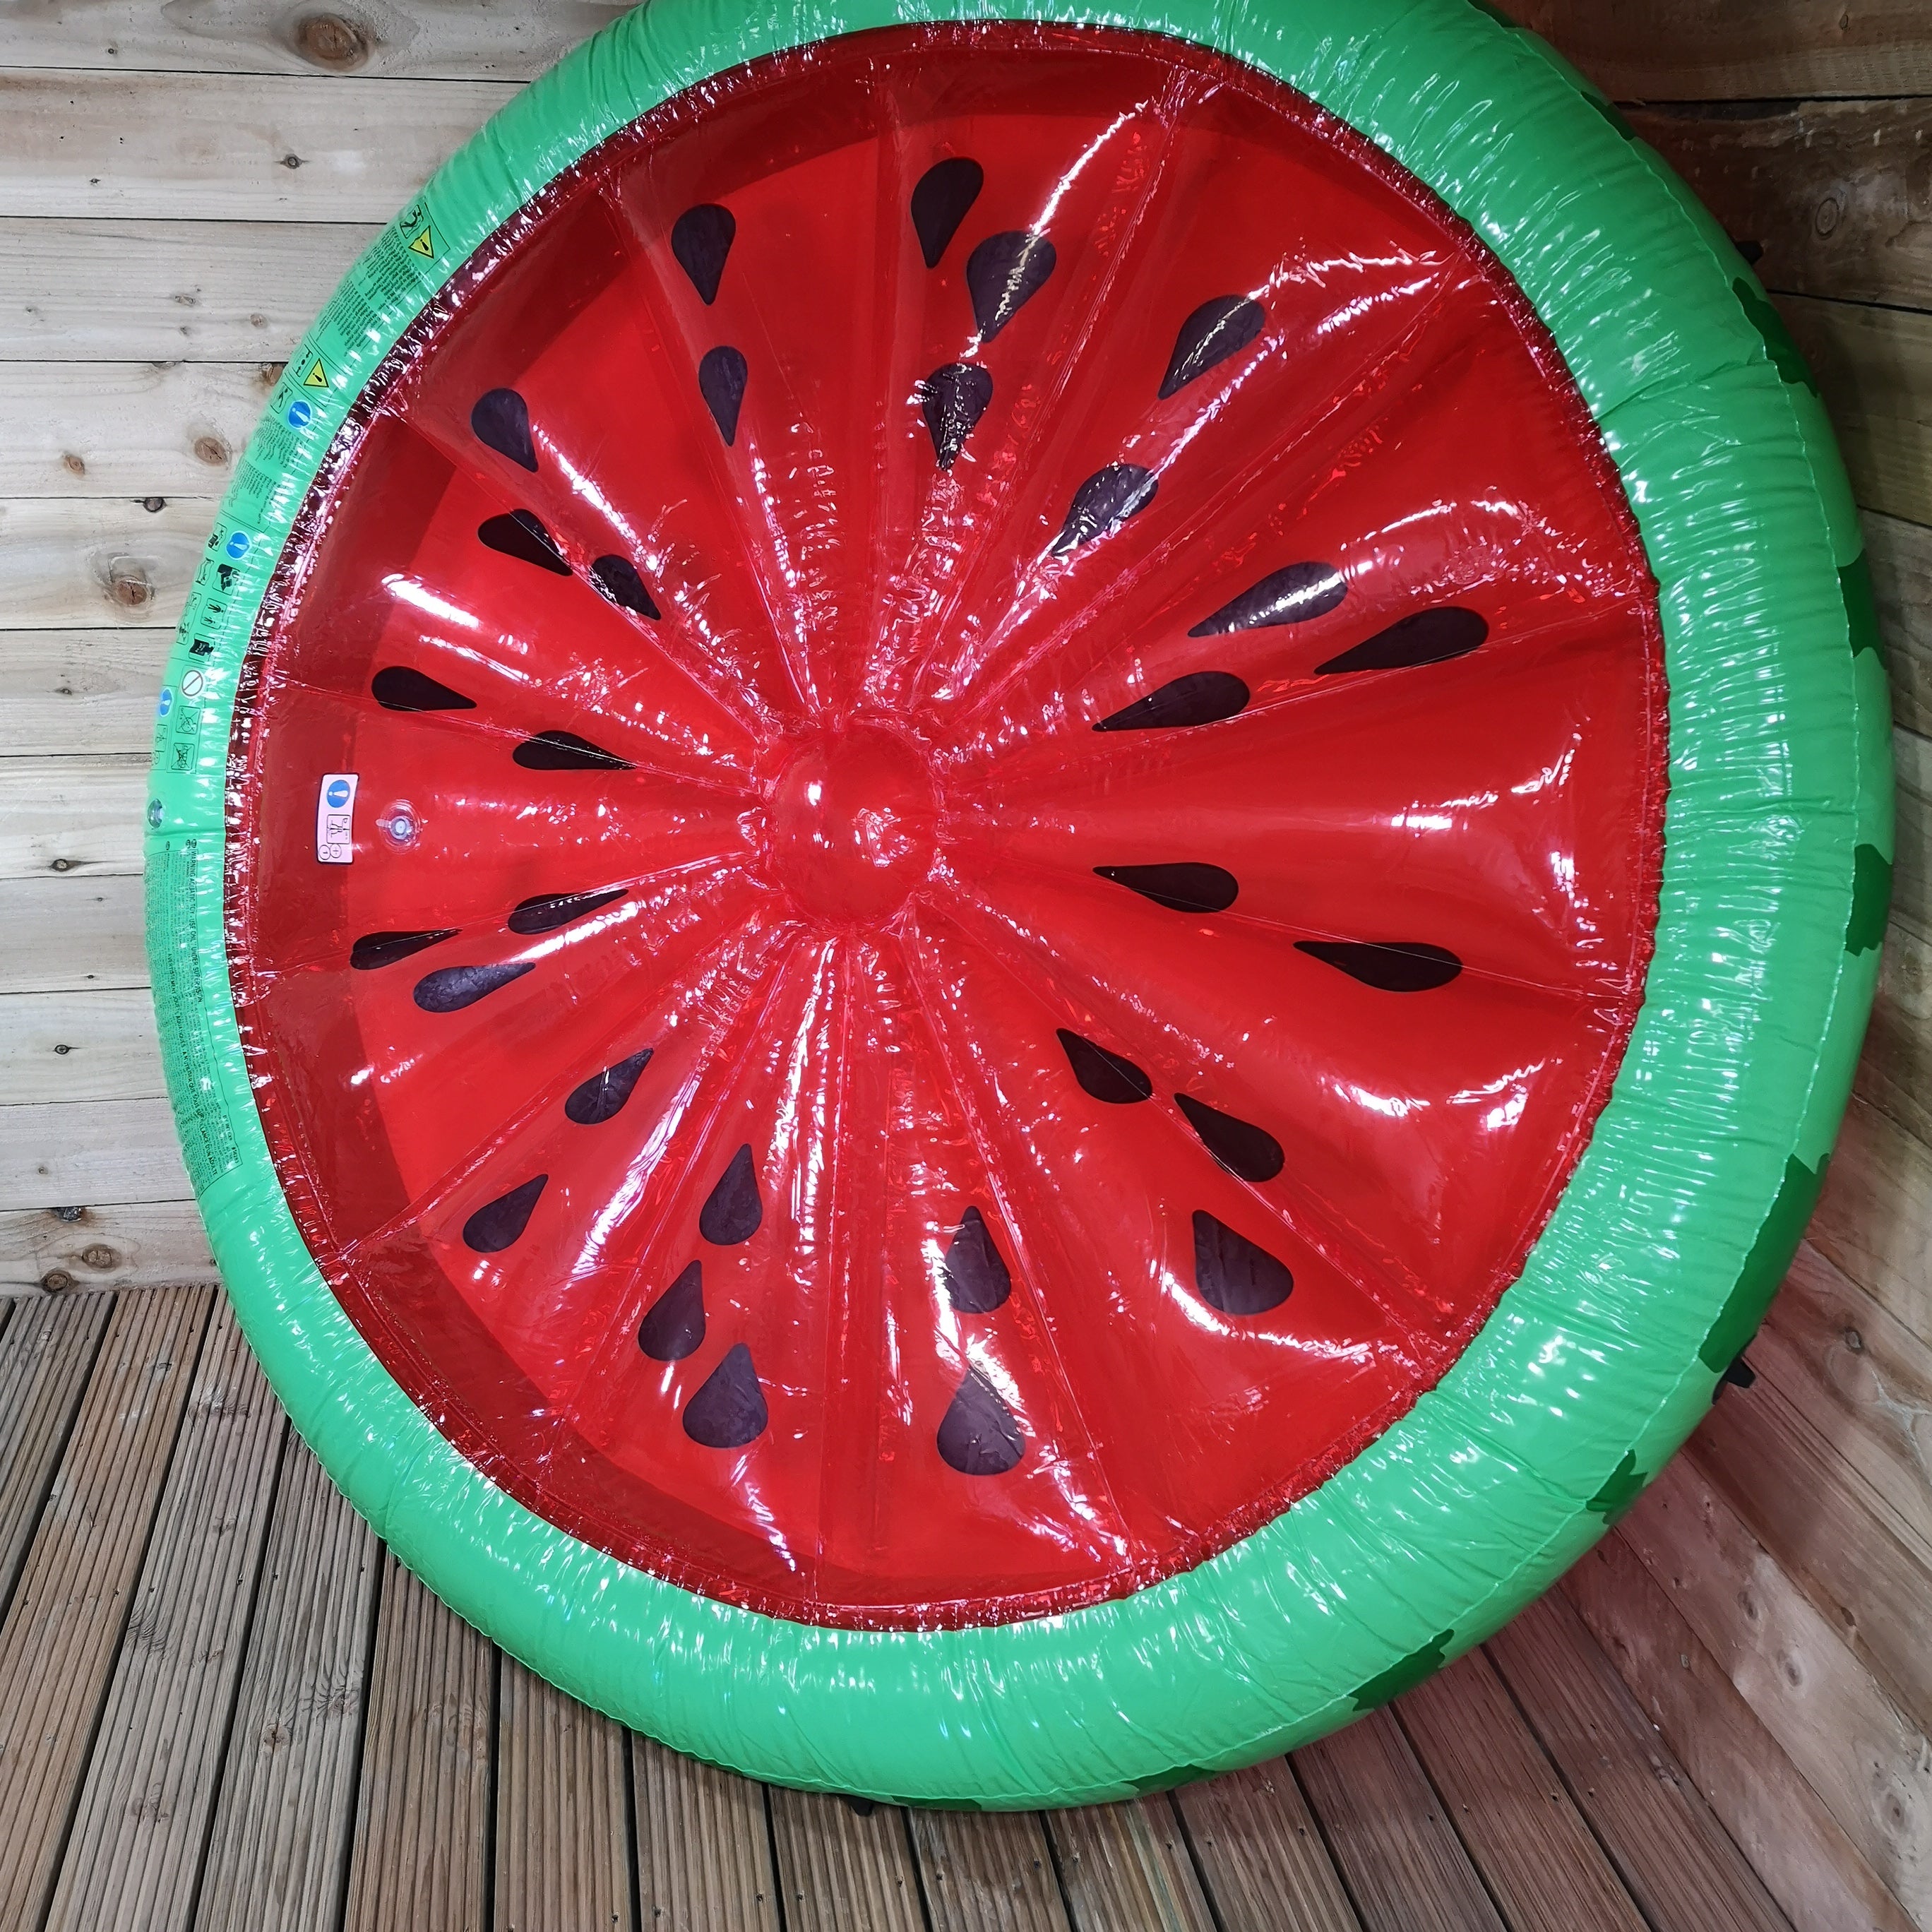 Watermelon Island Air Mattress Lilo Floating Relaxer Inflatable 183cmx23cm